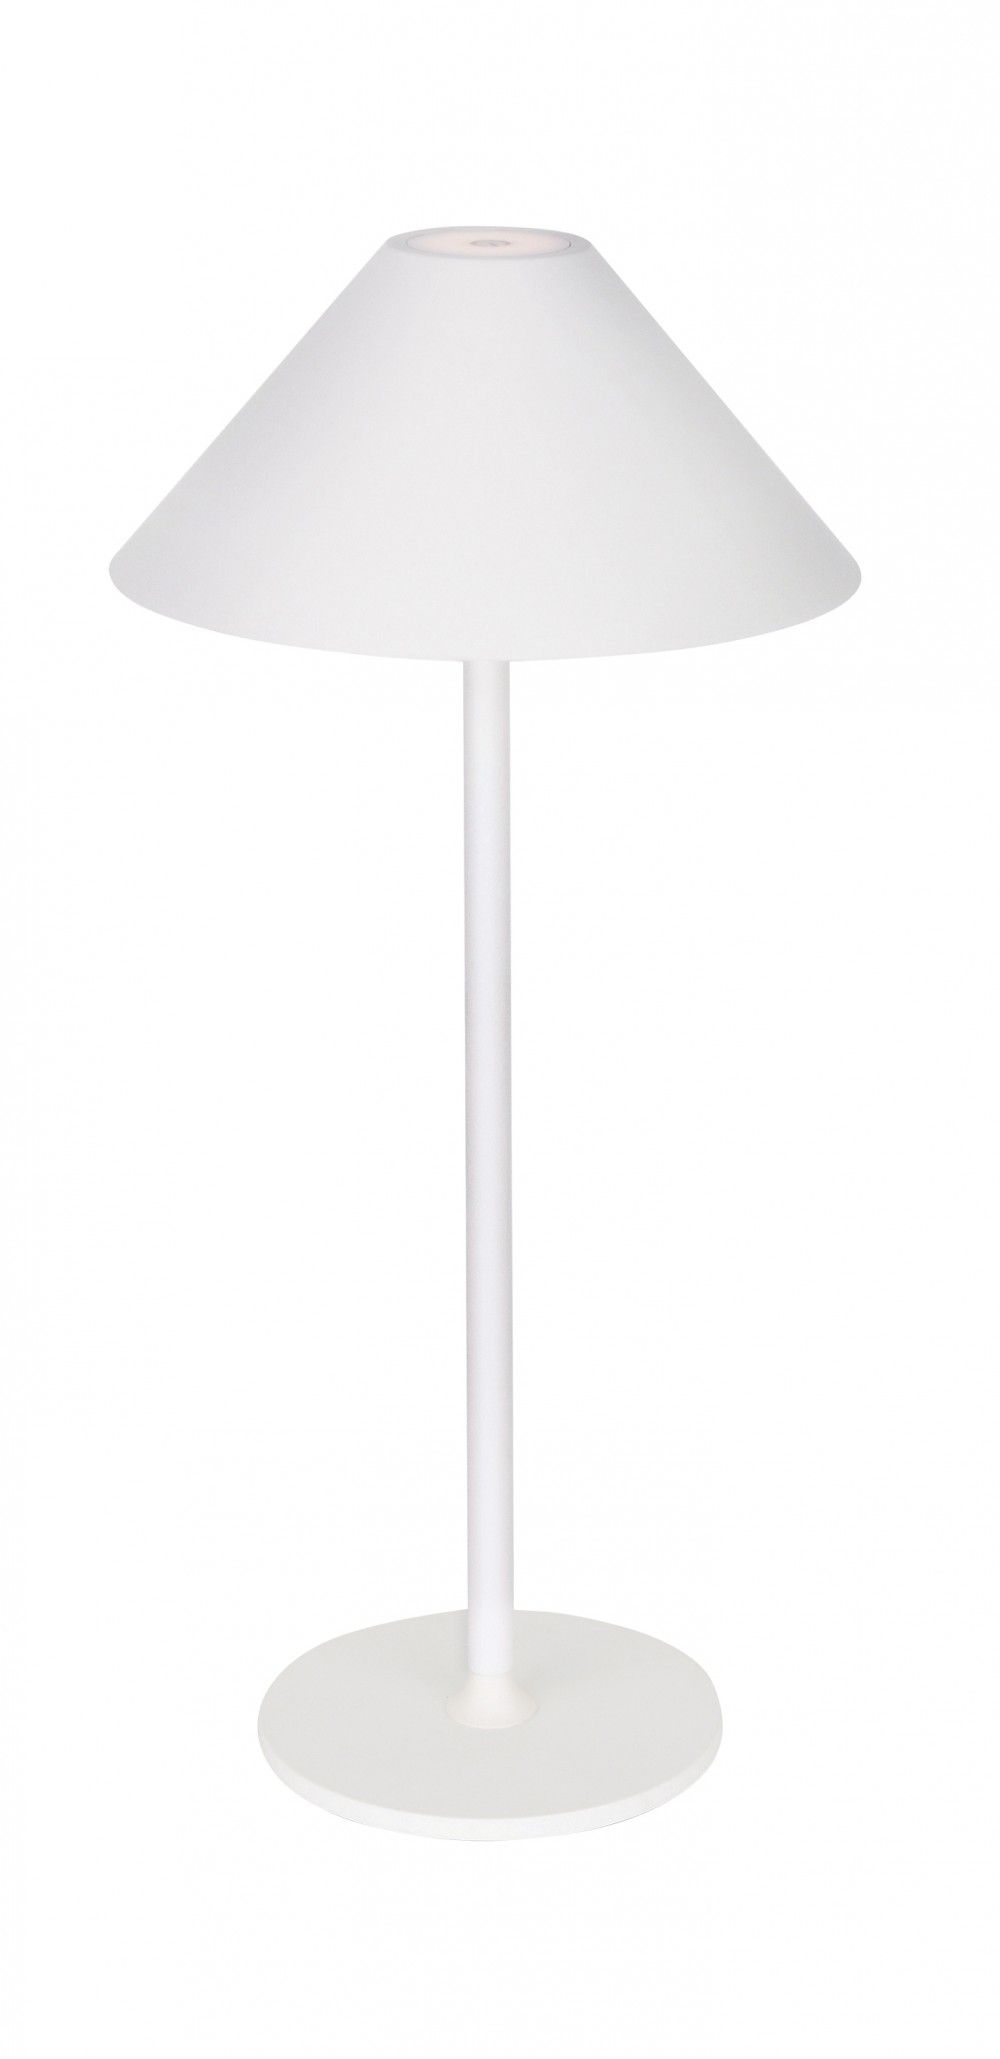 VIOKEF Table Light White with Battery Supply Cone - VIO-42...